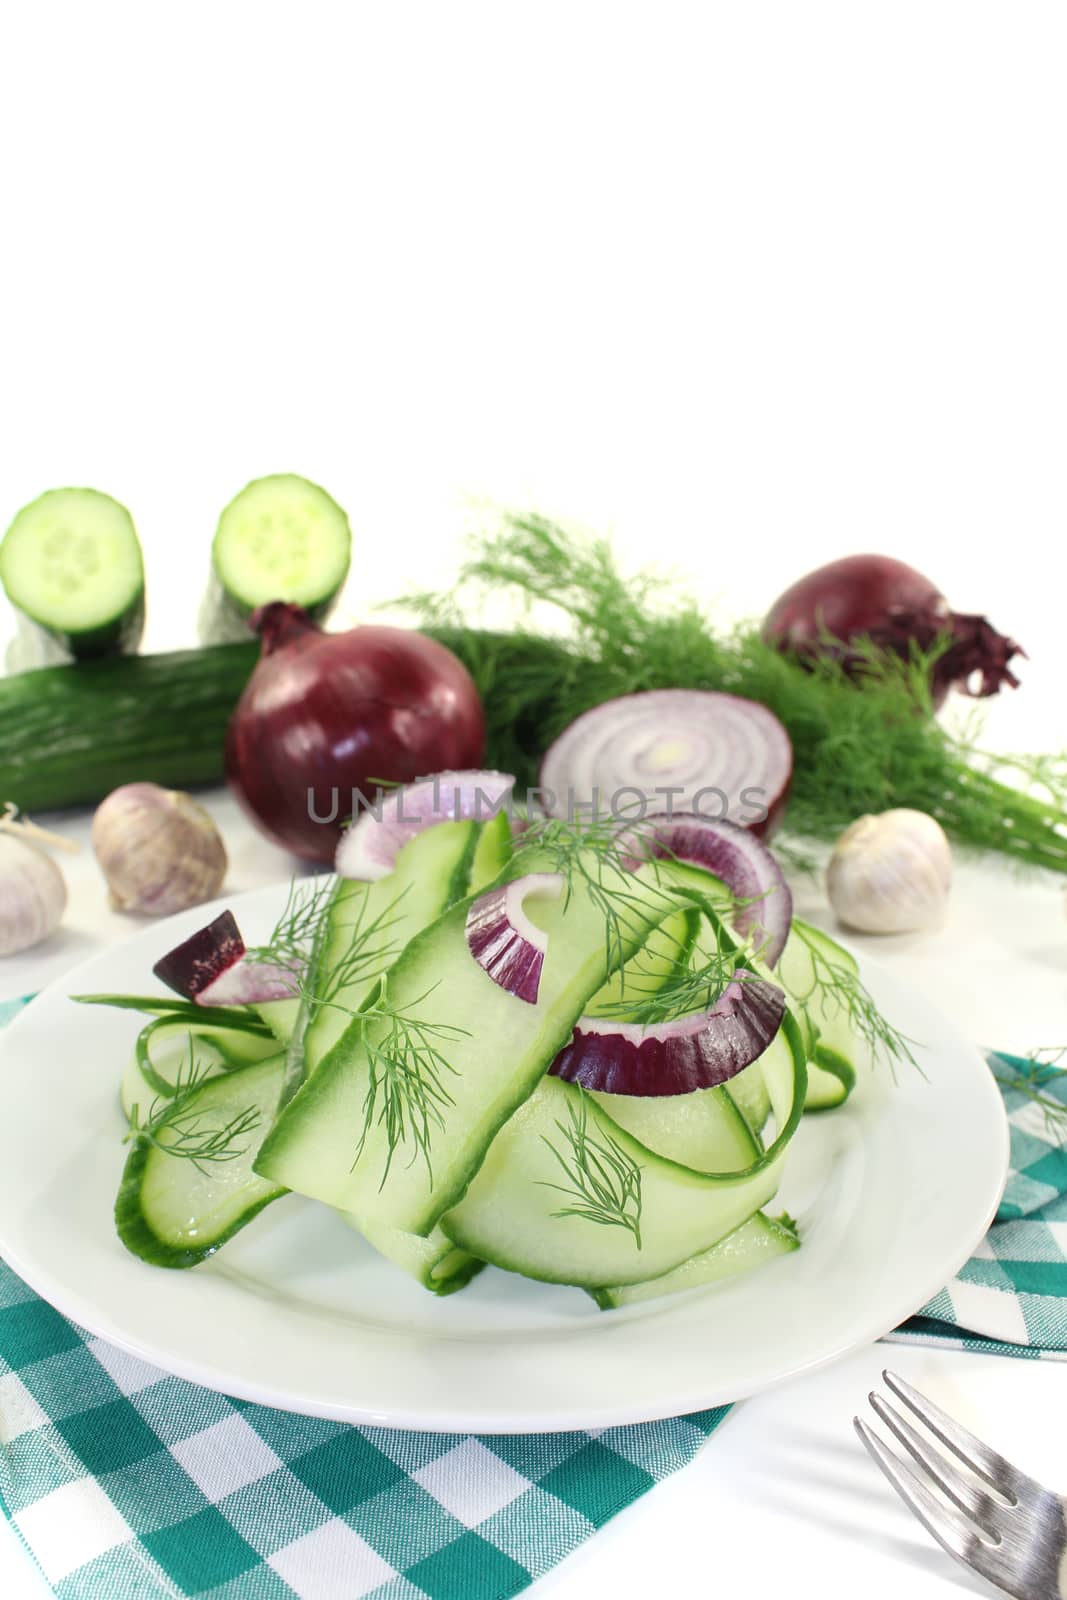 Cucumber salad with onions and dill on light background